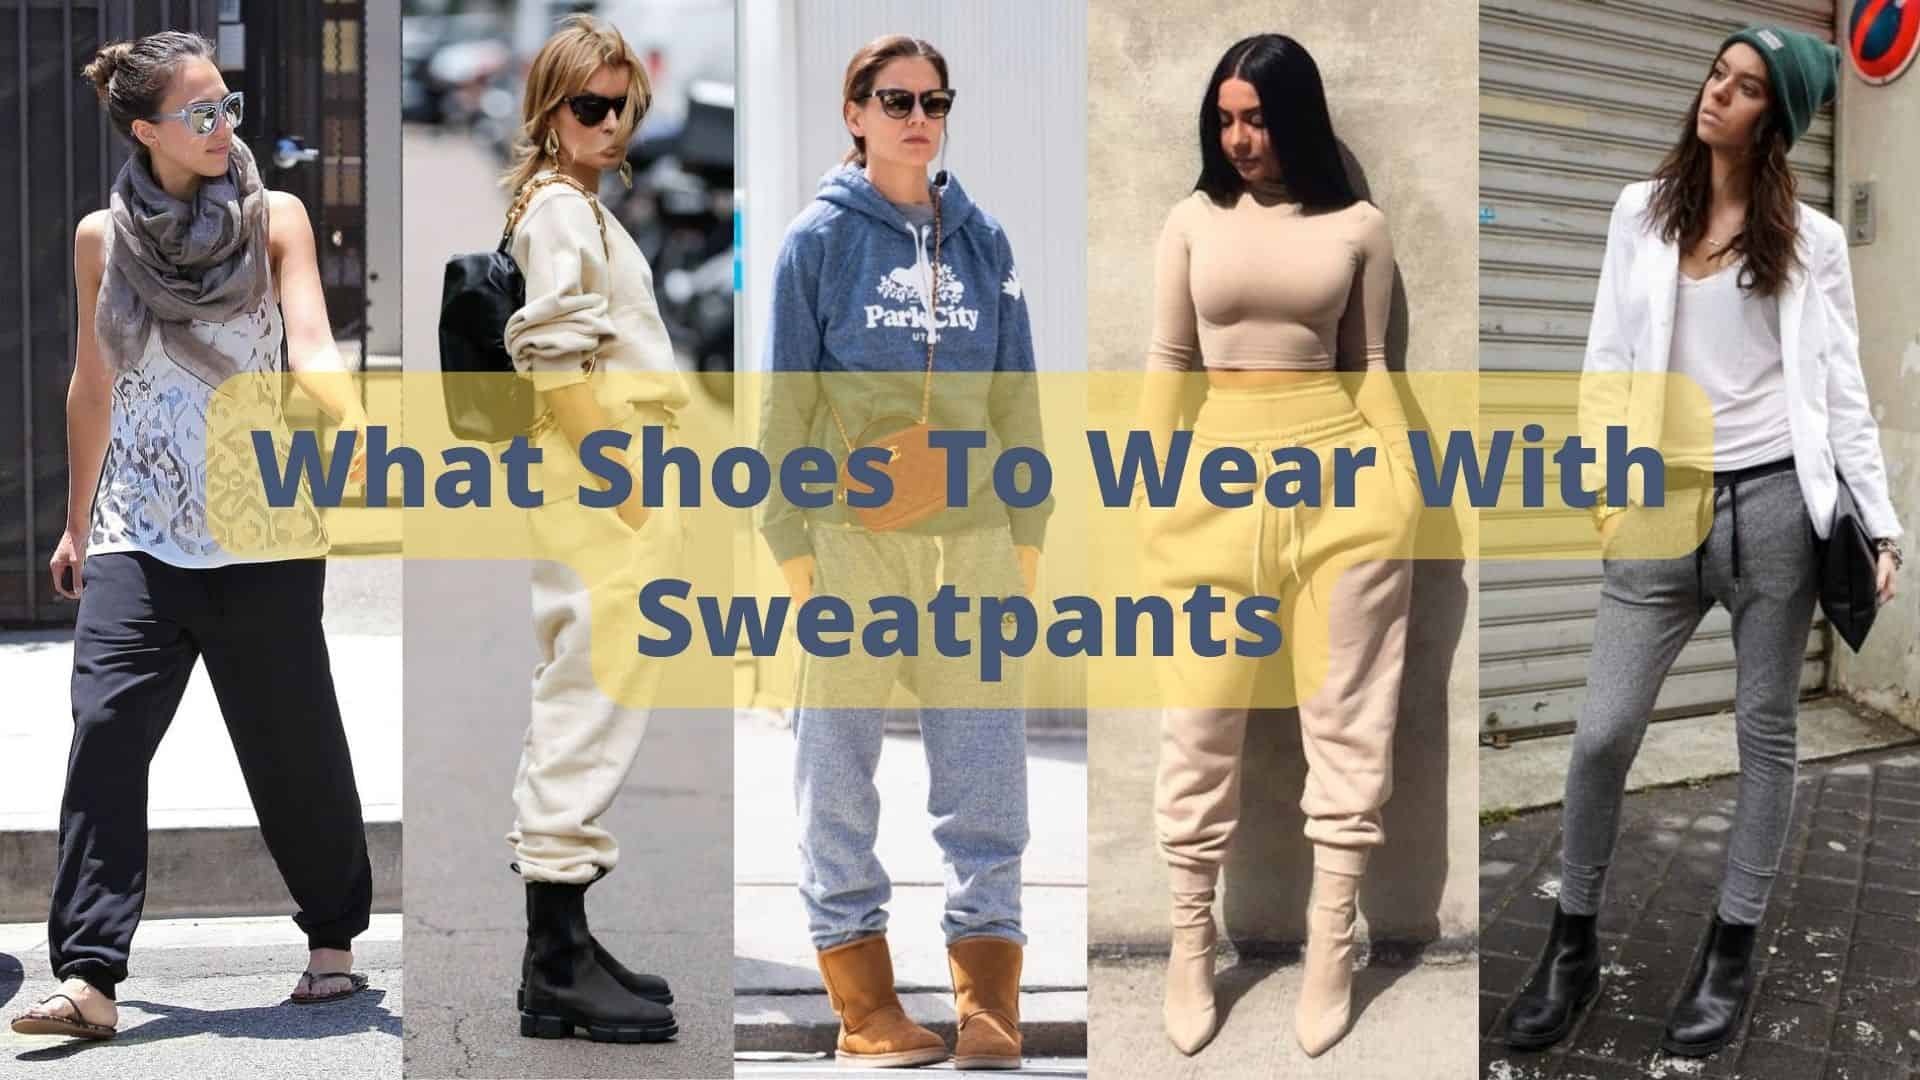 What Shoes to Wear with Sweatpants